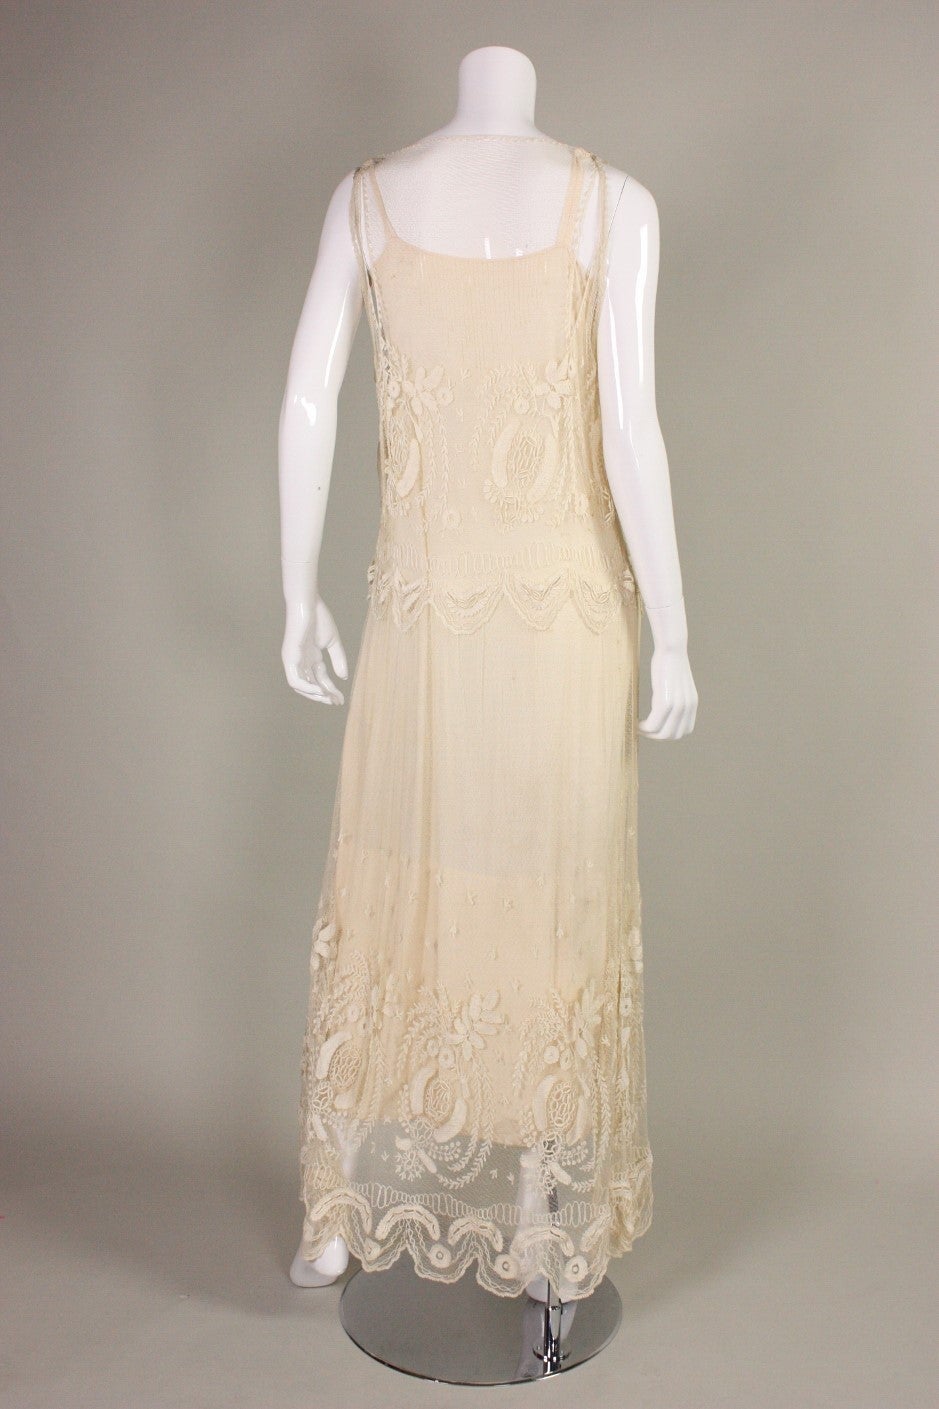 Women's Cream Net Dress with Embroidery, 1910s For Sale